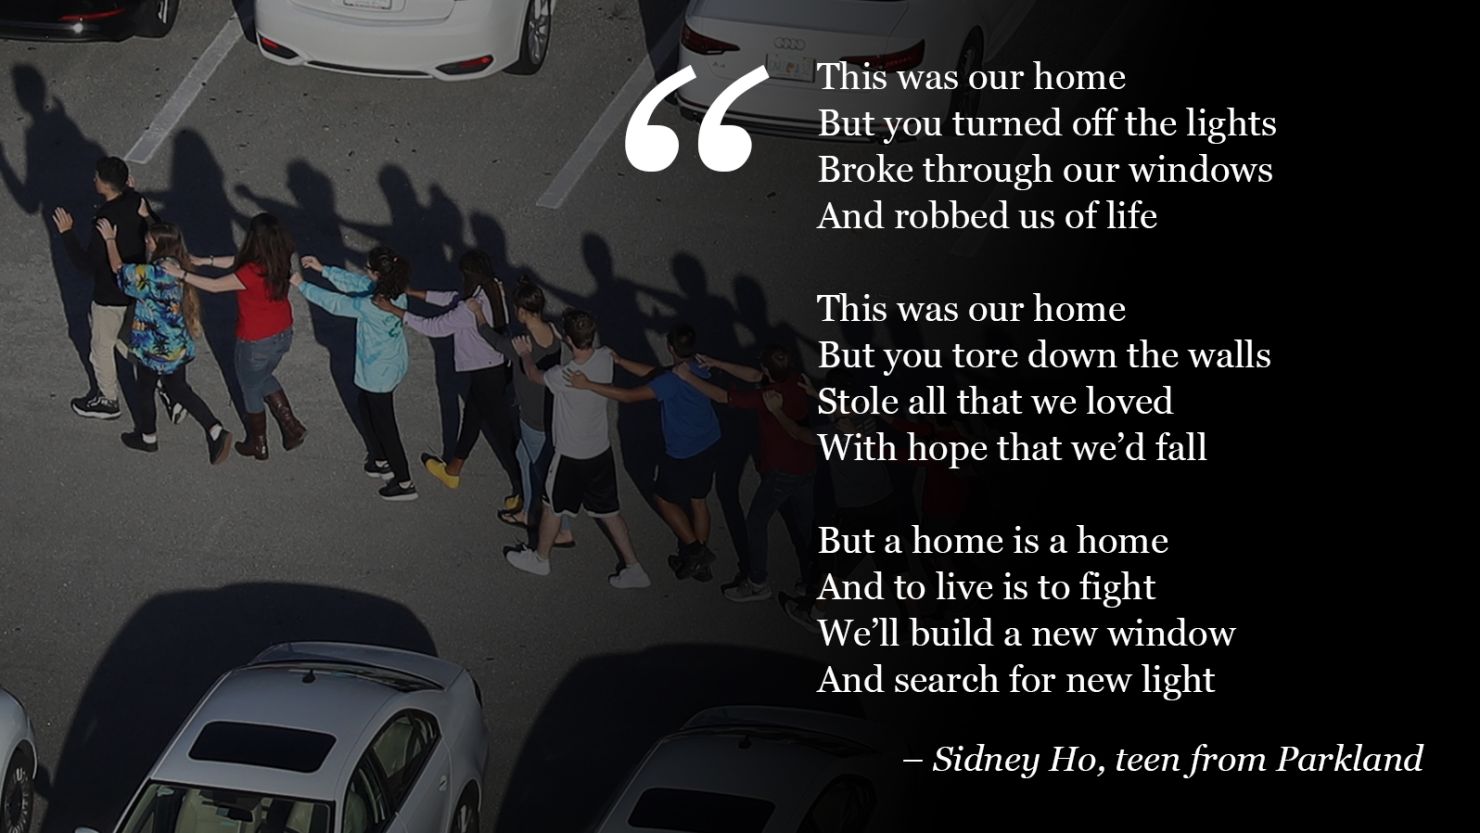 Parkland teen Sidney Ho wrote a poem to cast light on her hometown after the tragedy.